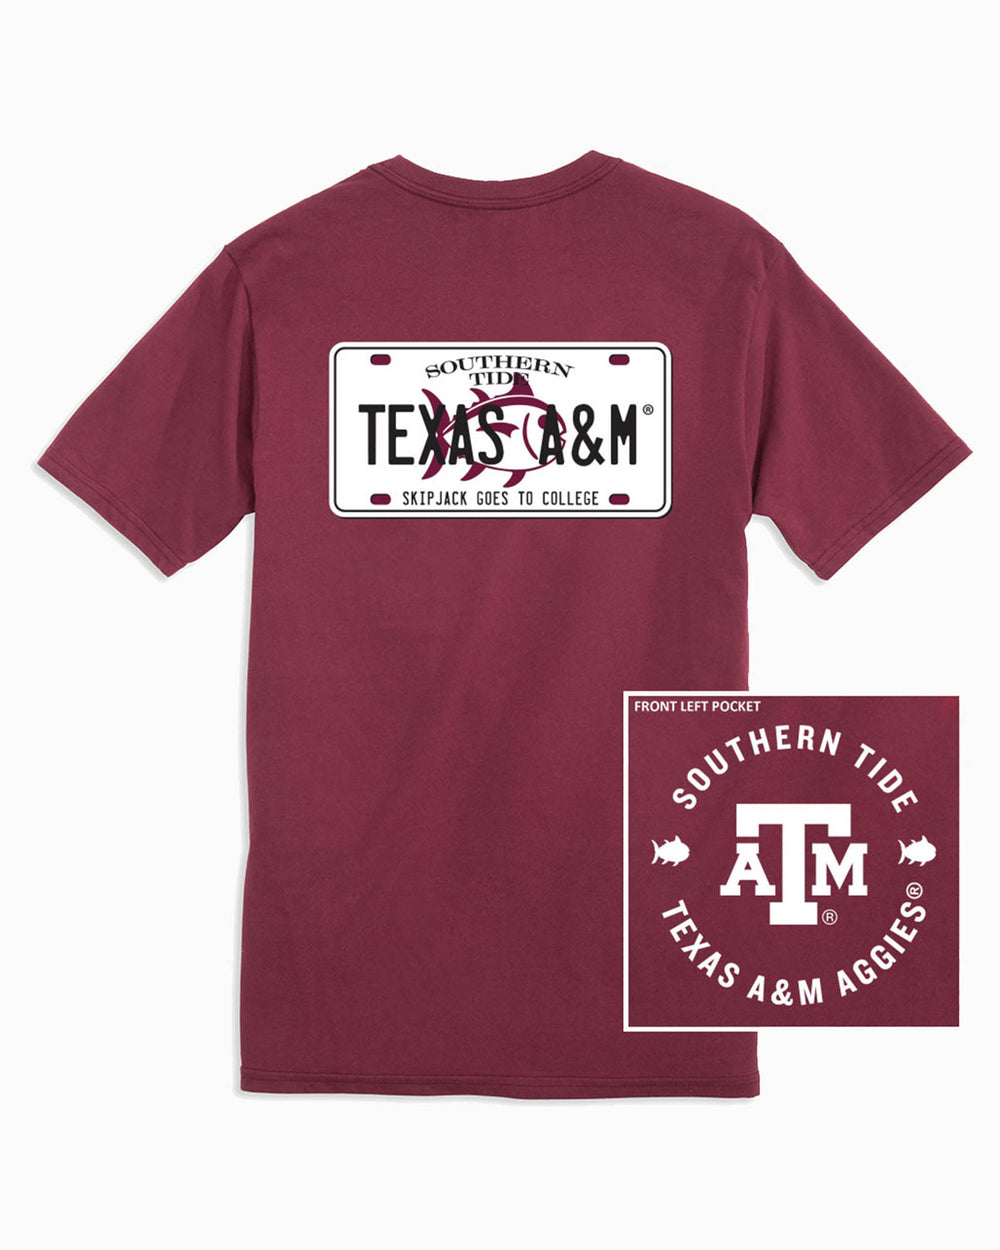 The front and back of the Texas A&M Aggies License Plate T-Shirt by Southern Tide - Chianti